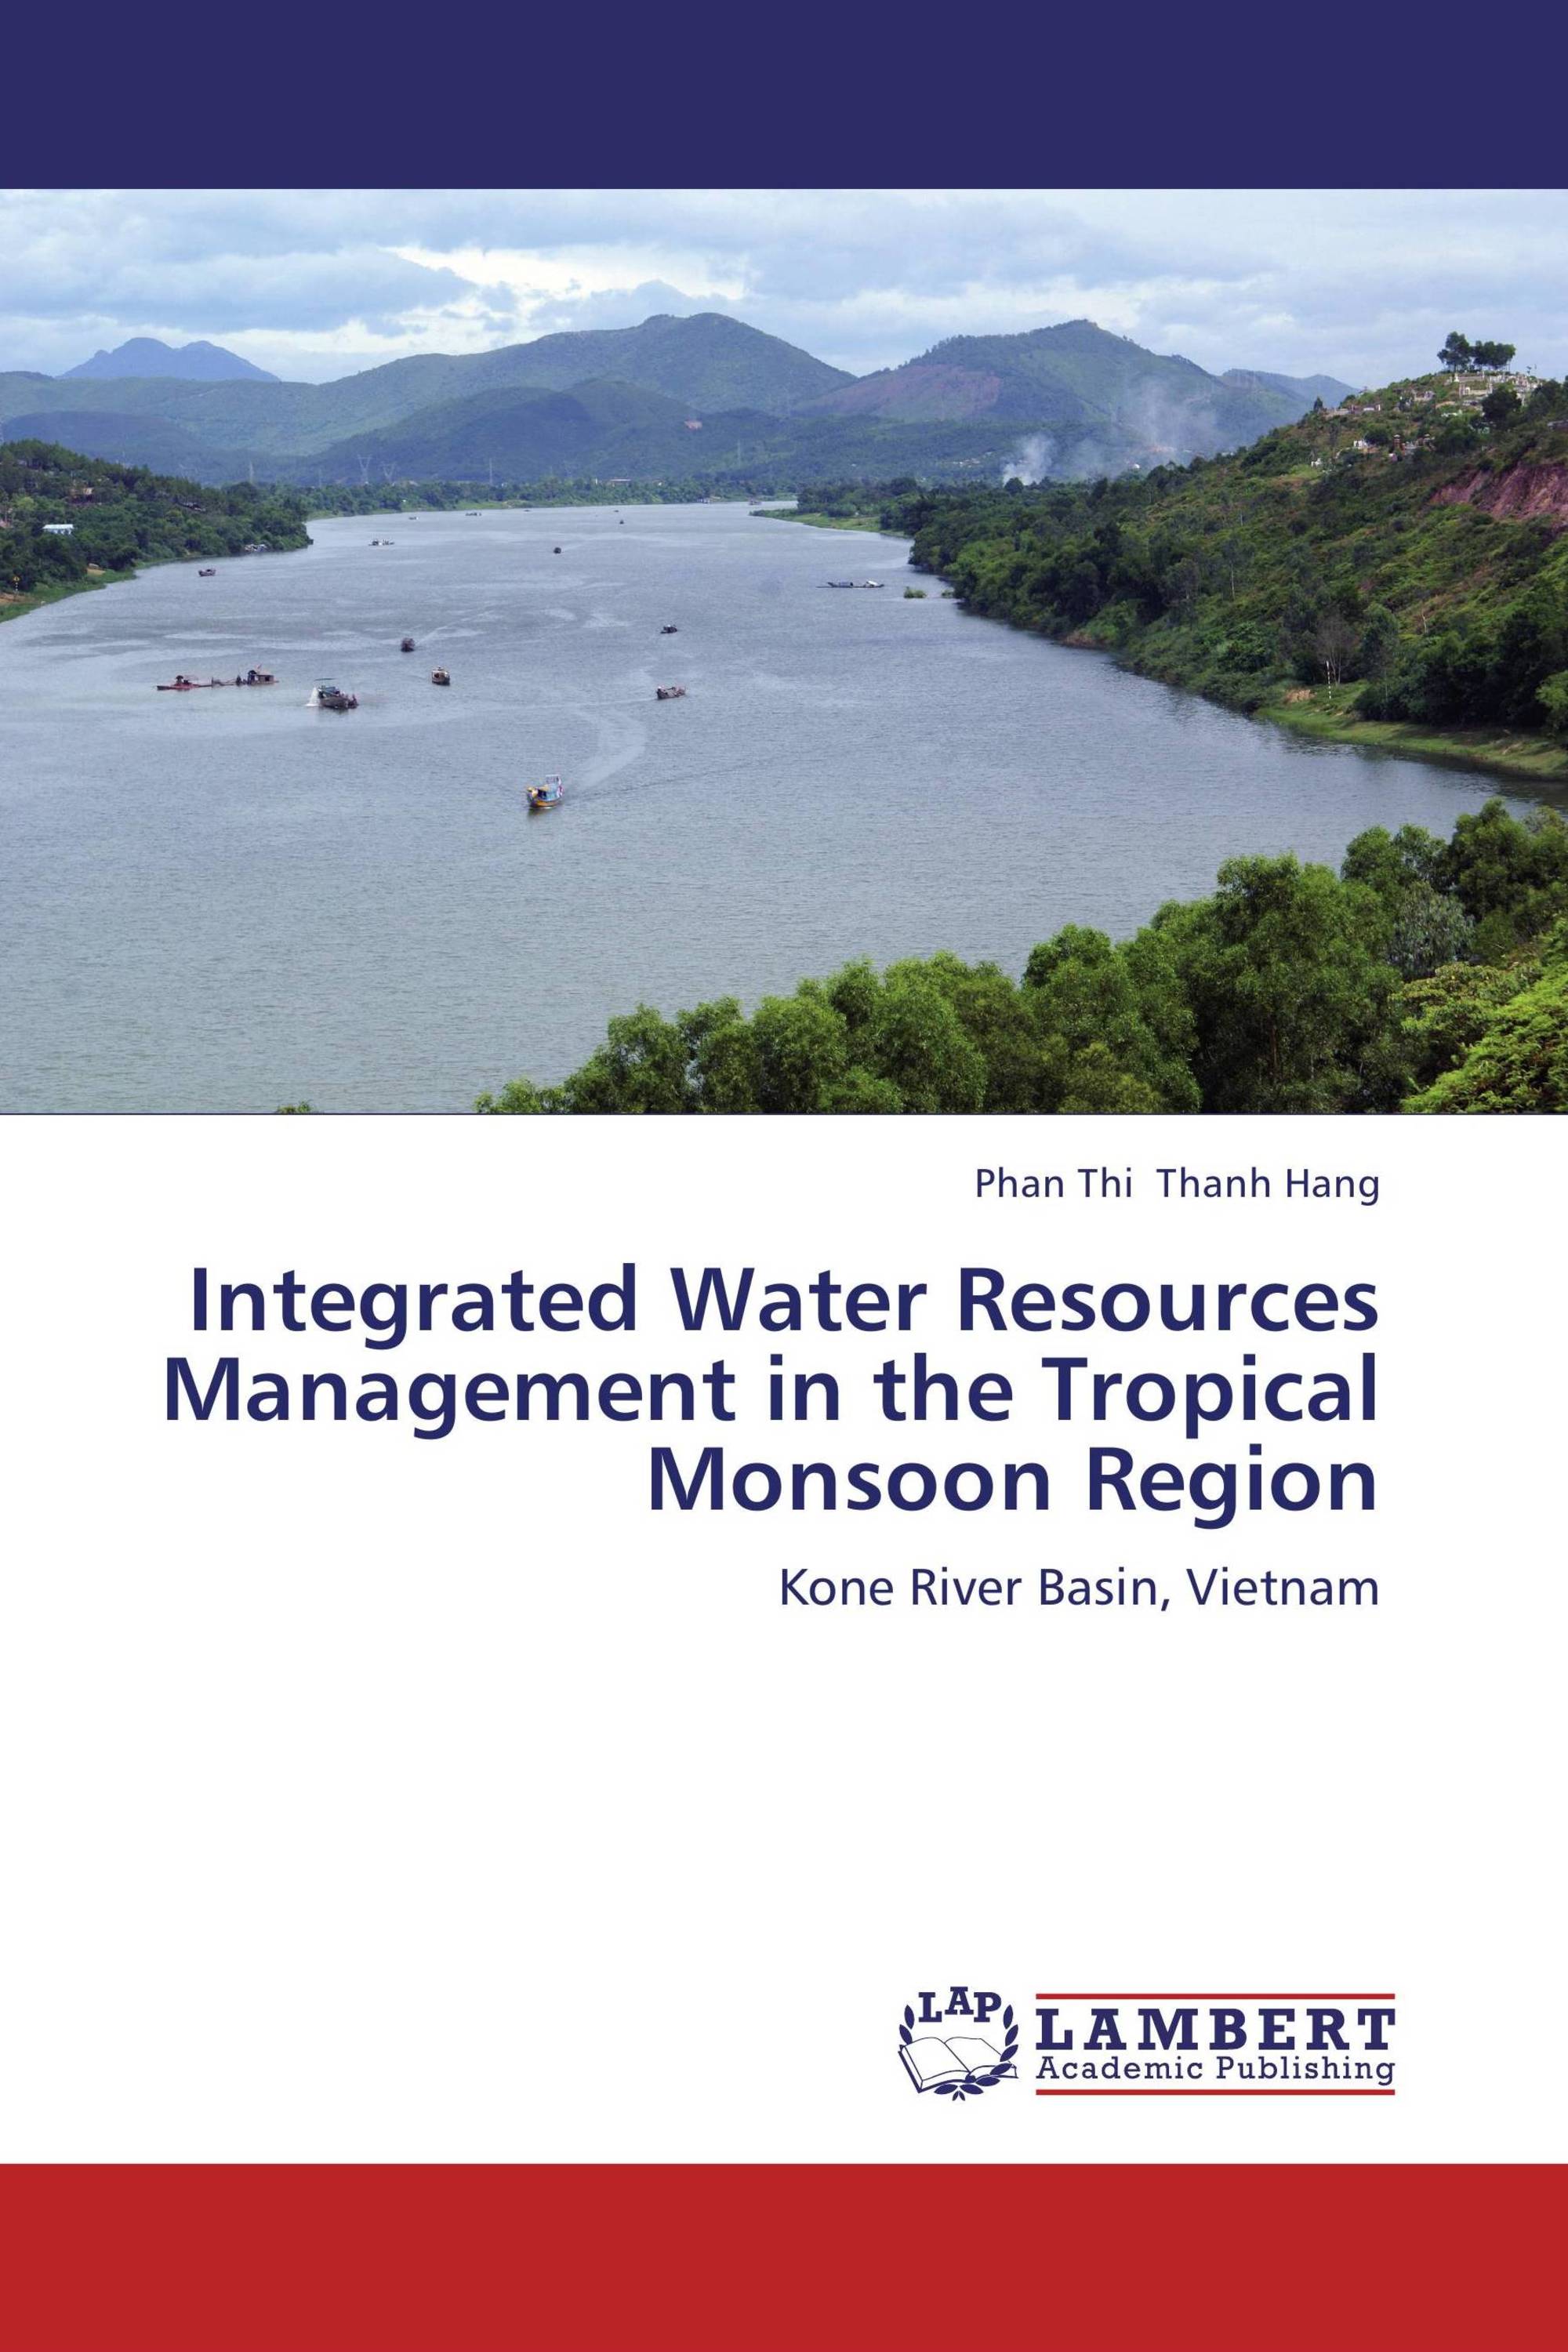 research topics water resources management